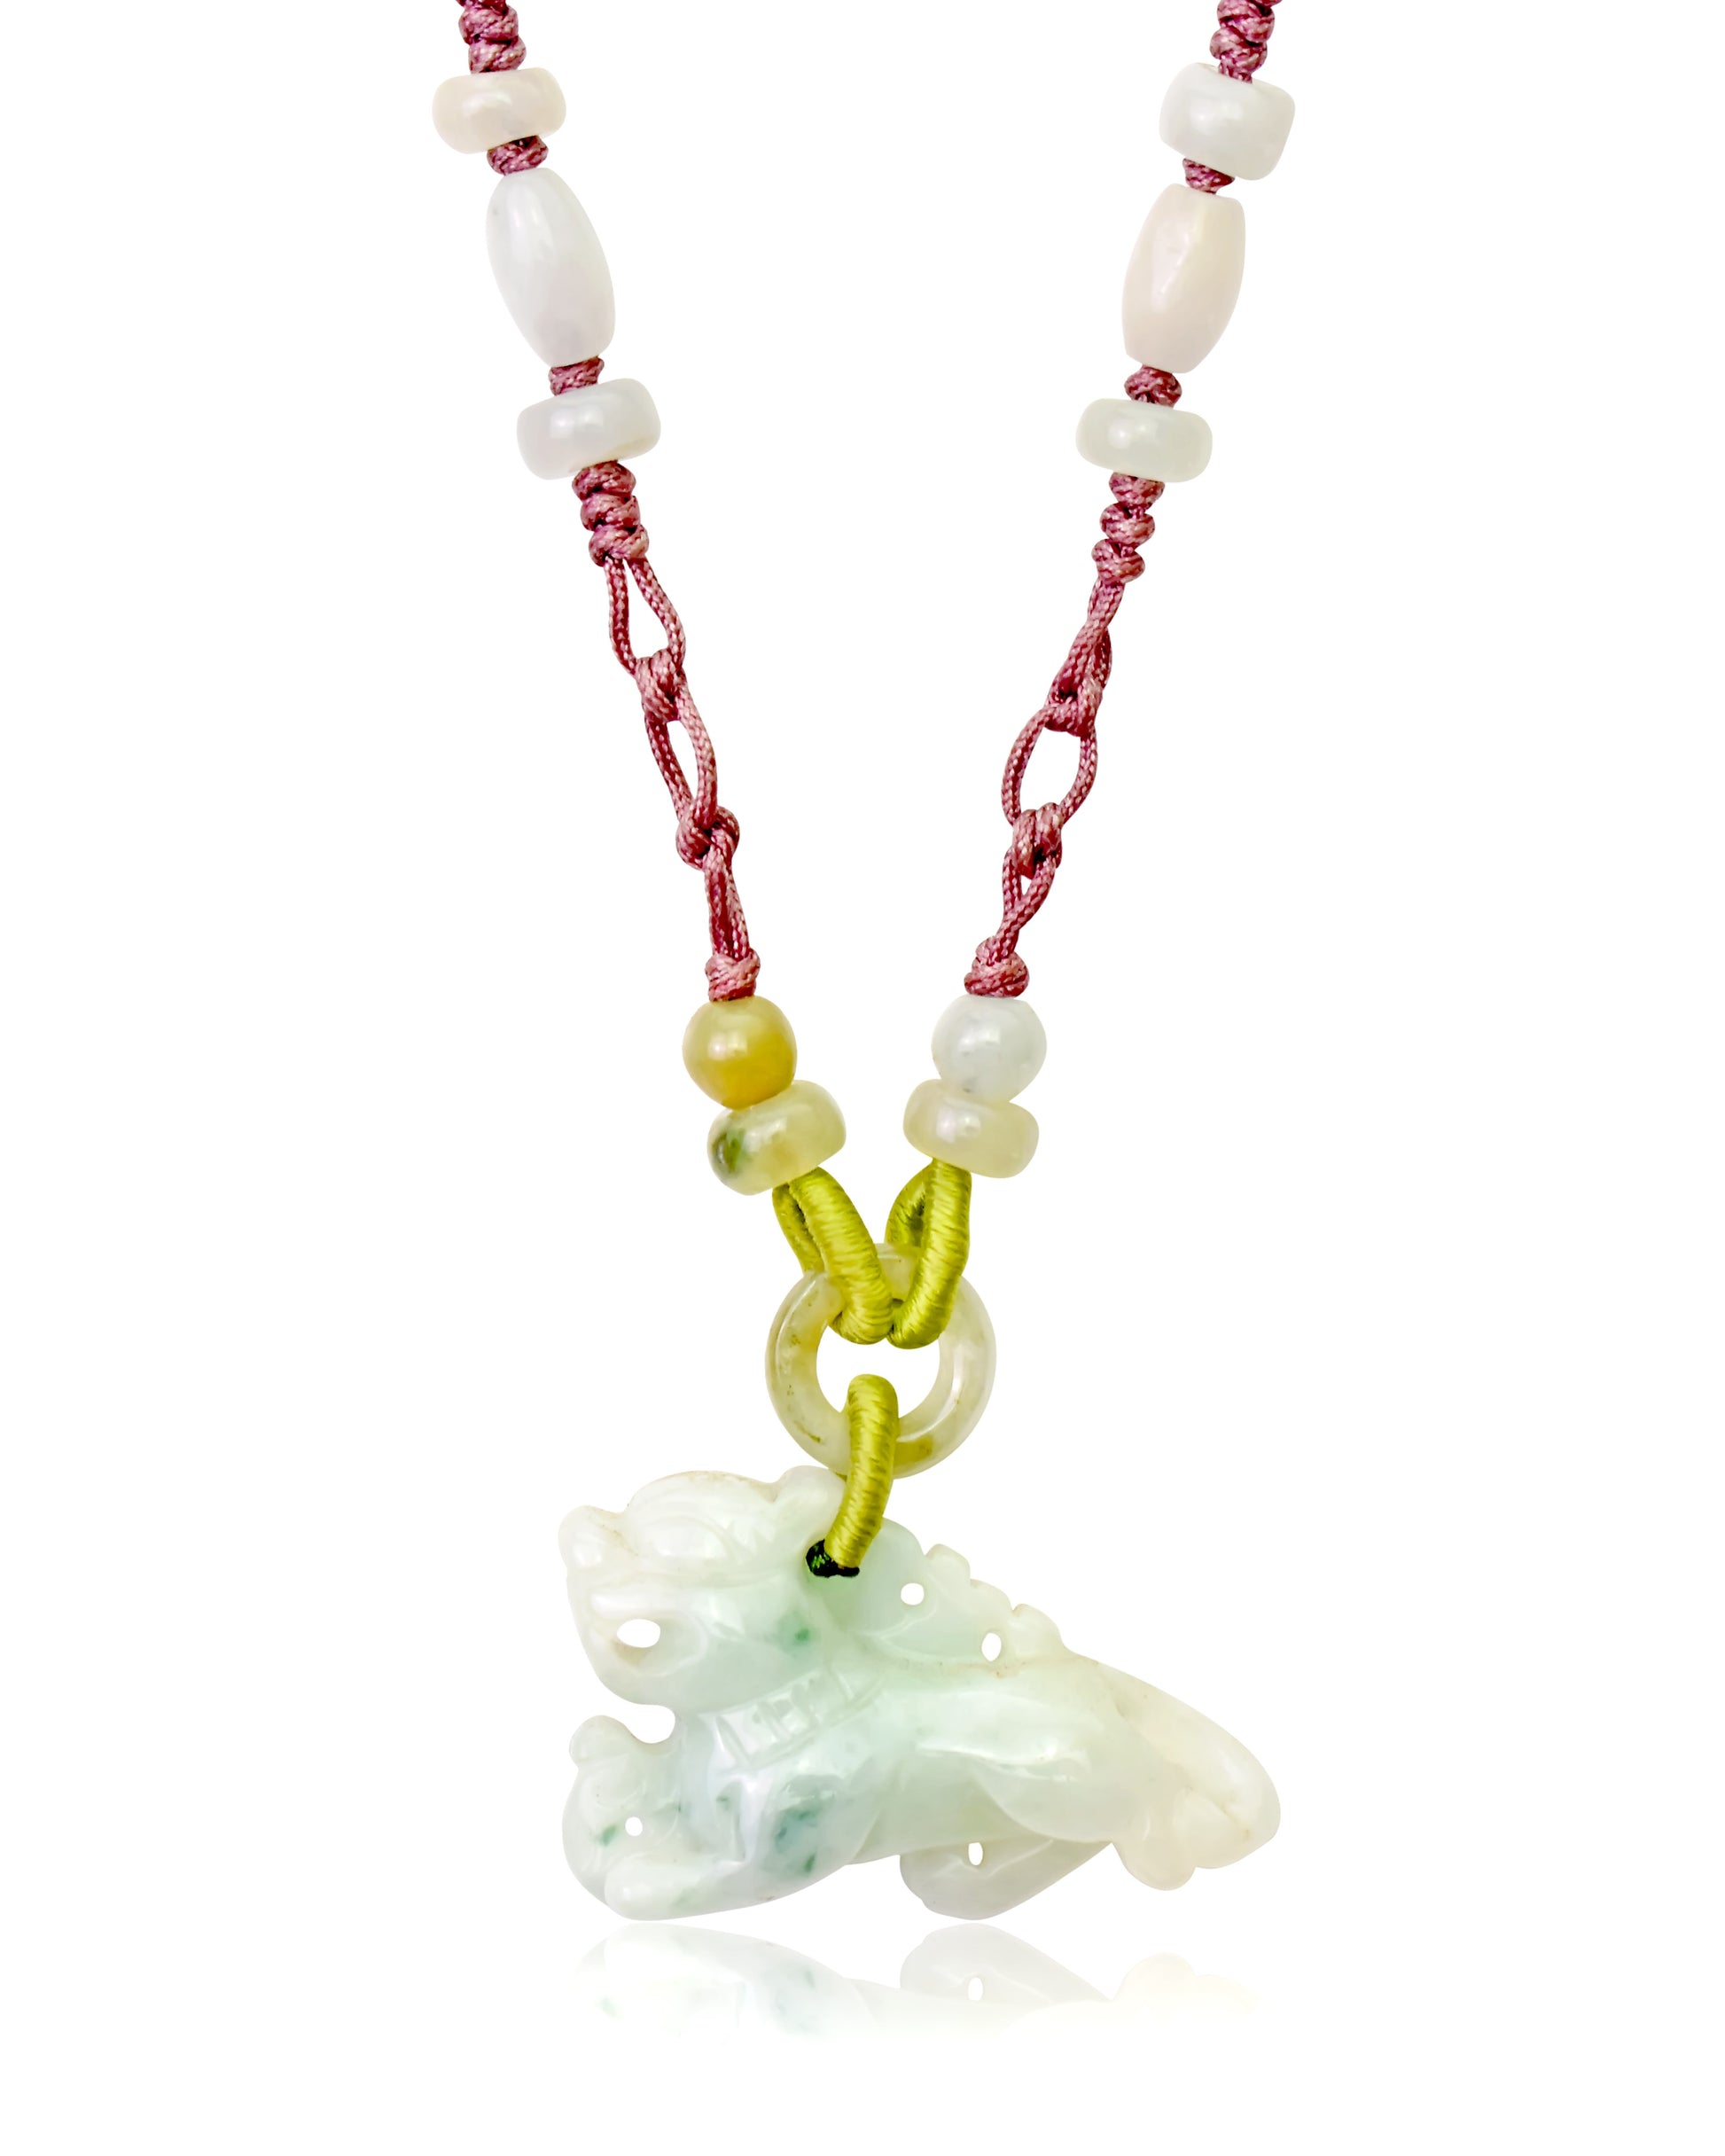 Unleash Your Inner Lion with a Handmade Jade Pendant made with Lavender Cord